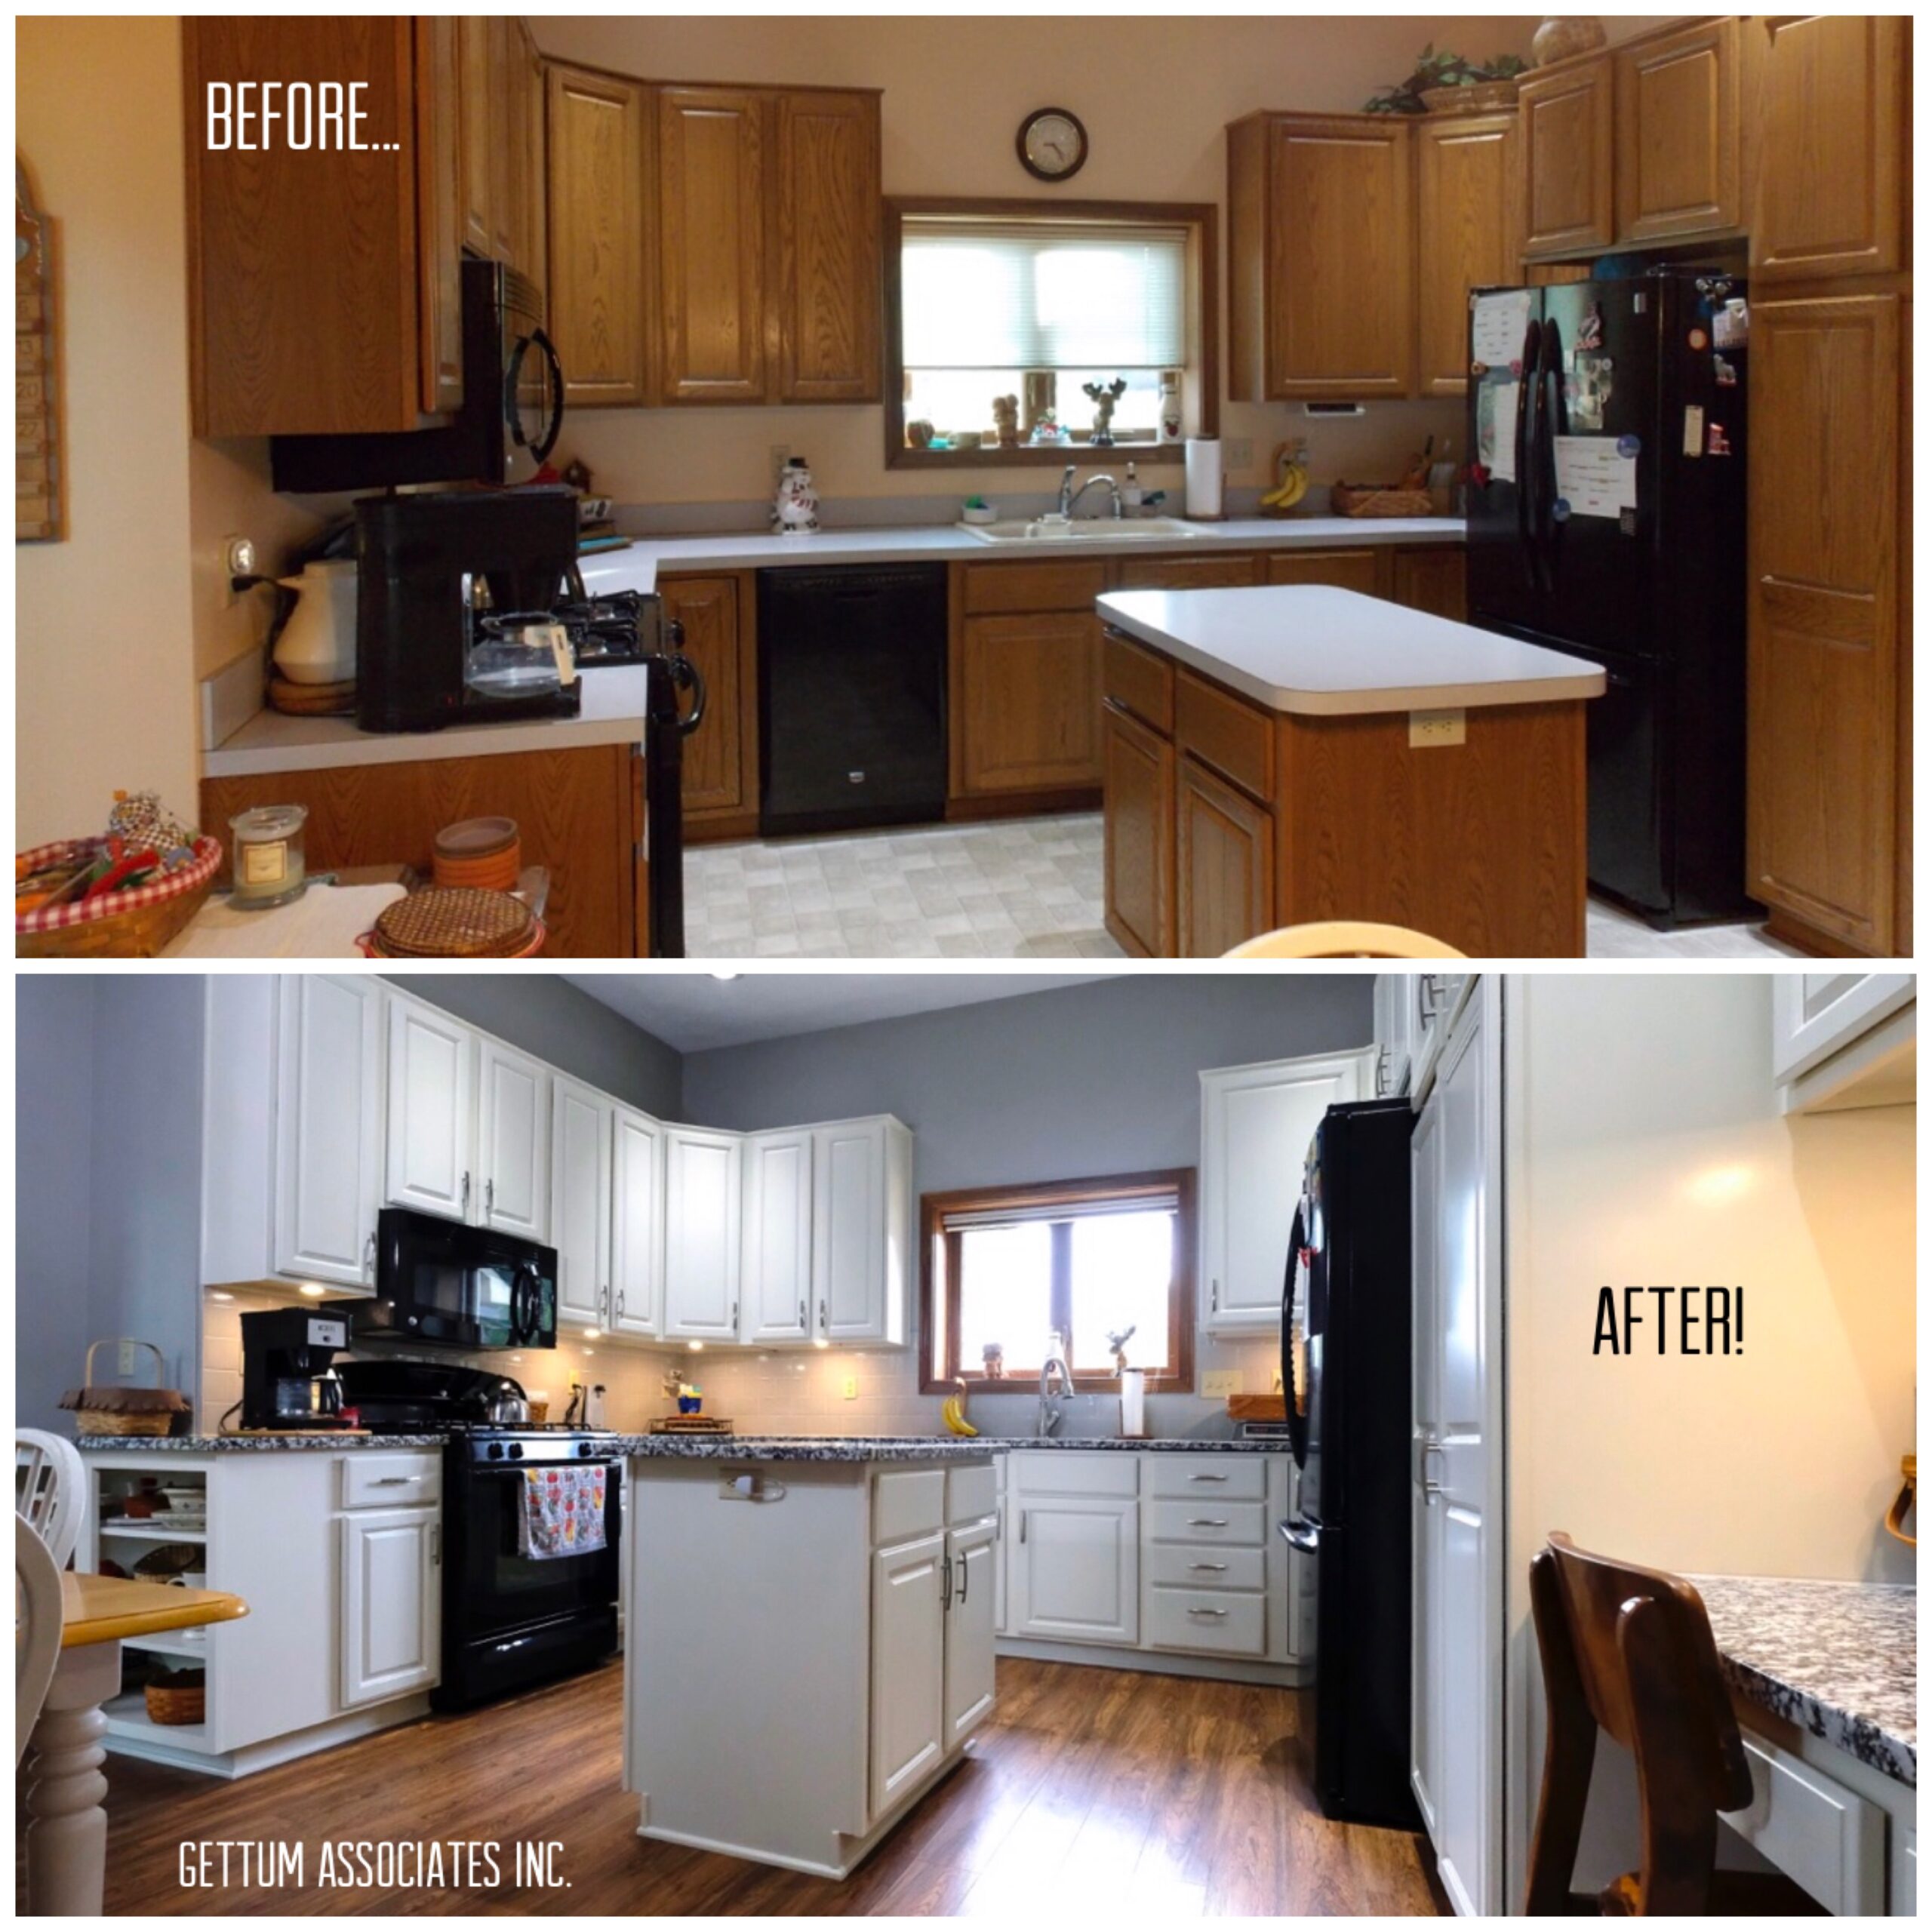 Kitchen Home Remodeling Do's and Don'ts. - Gettum Associates, Inc.